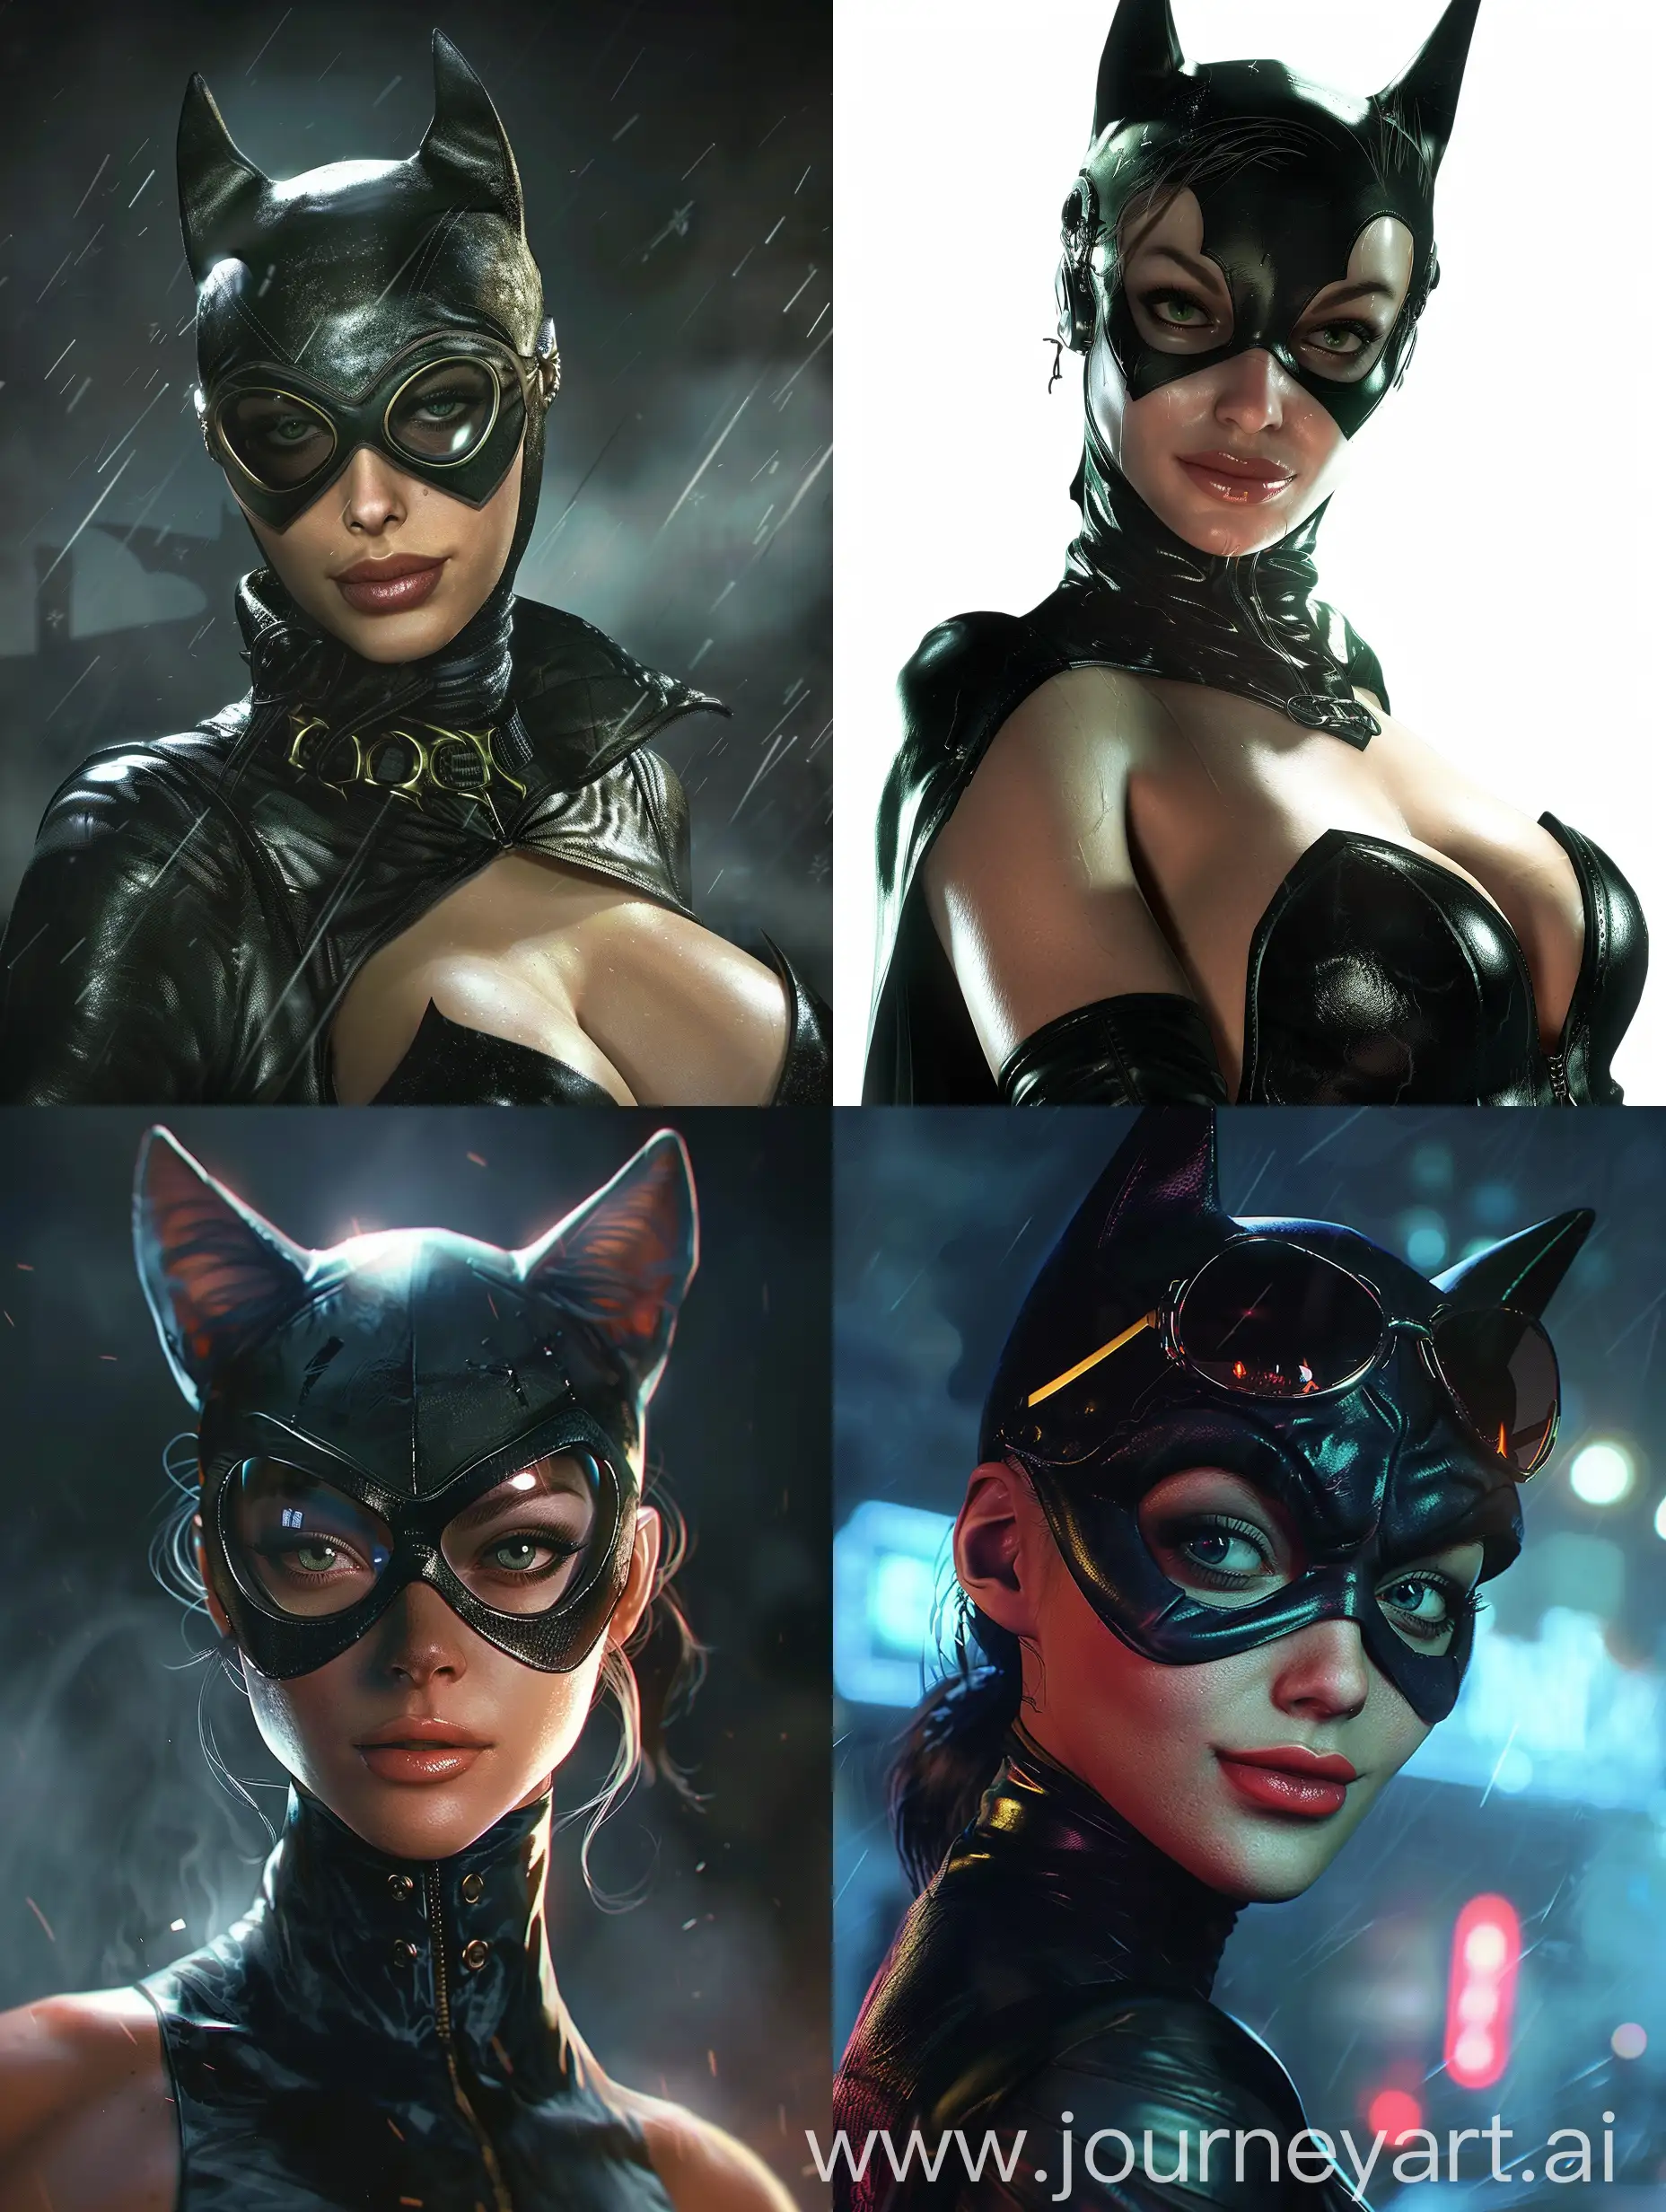 Catwoman-in-Batman-Game-Femme-Fatale-on-Prowl